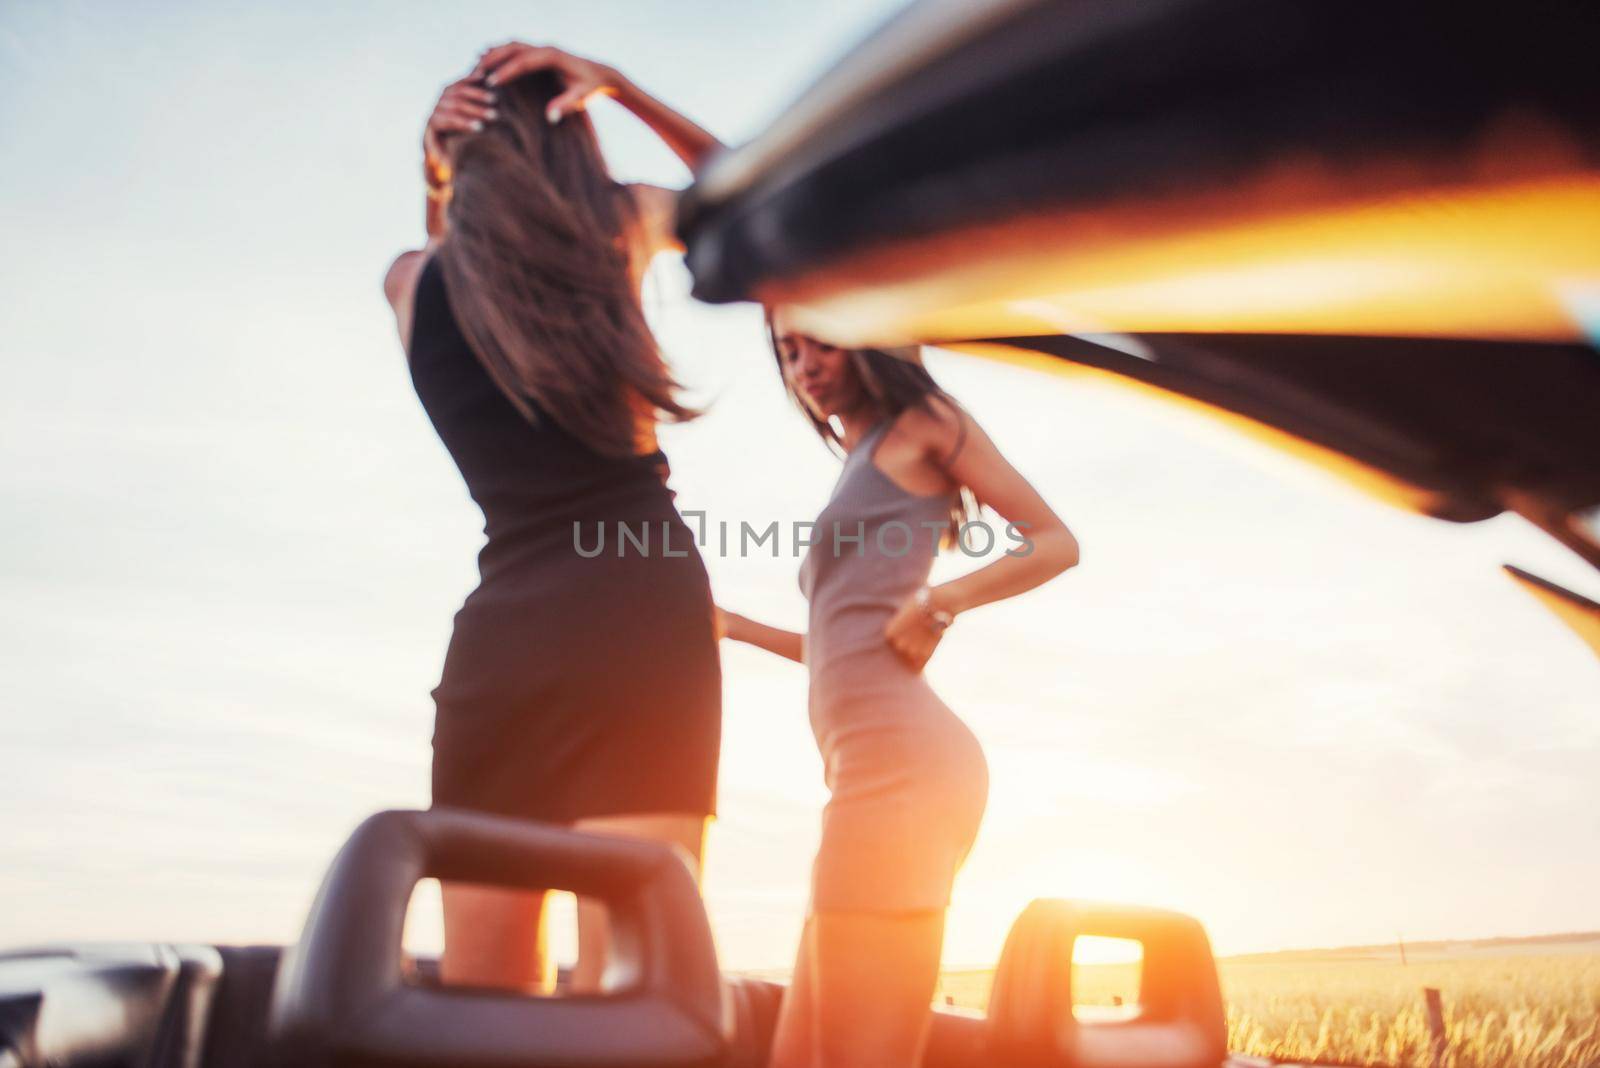 Girls gladly posing next to a black car against the sky on a fantastic sunset.